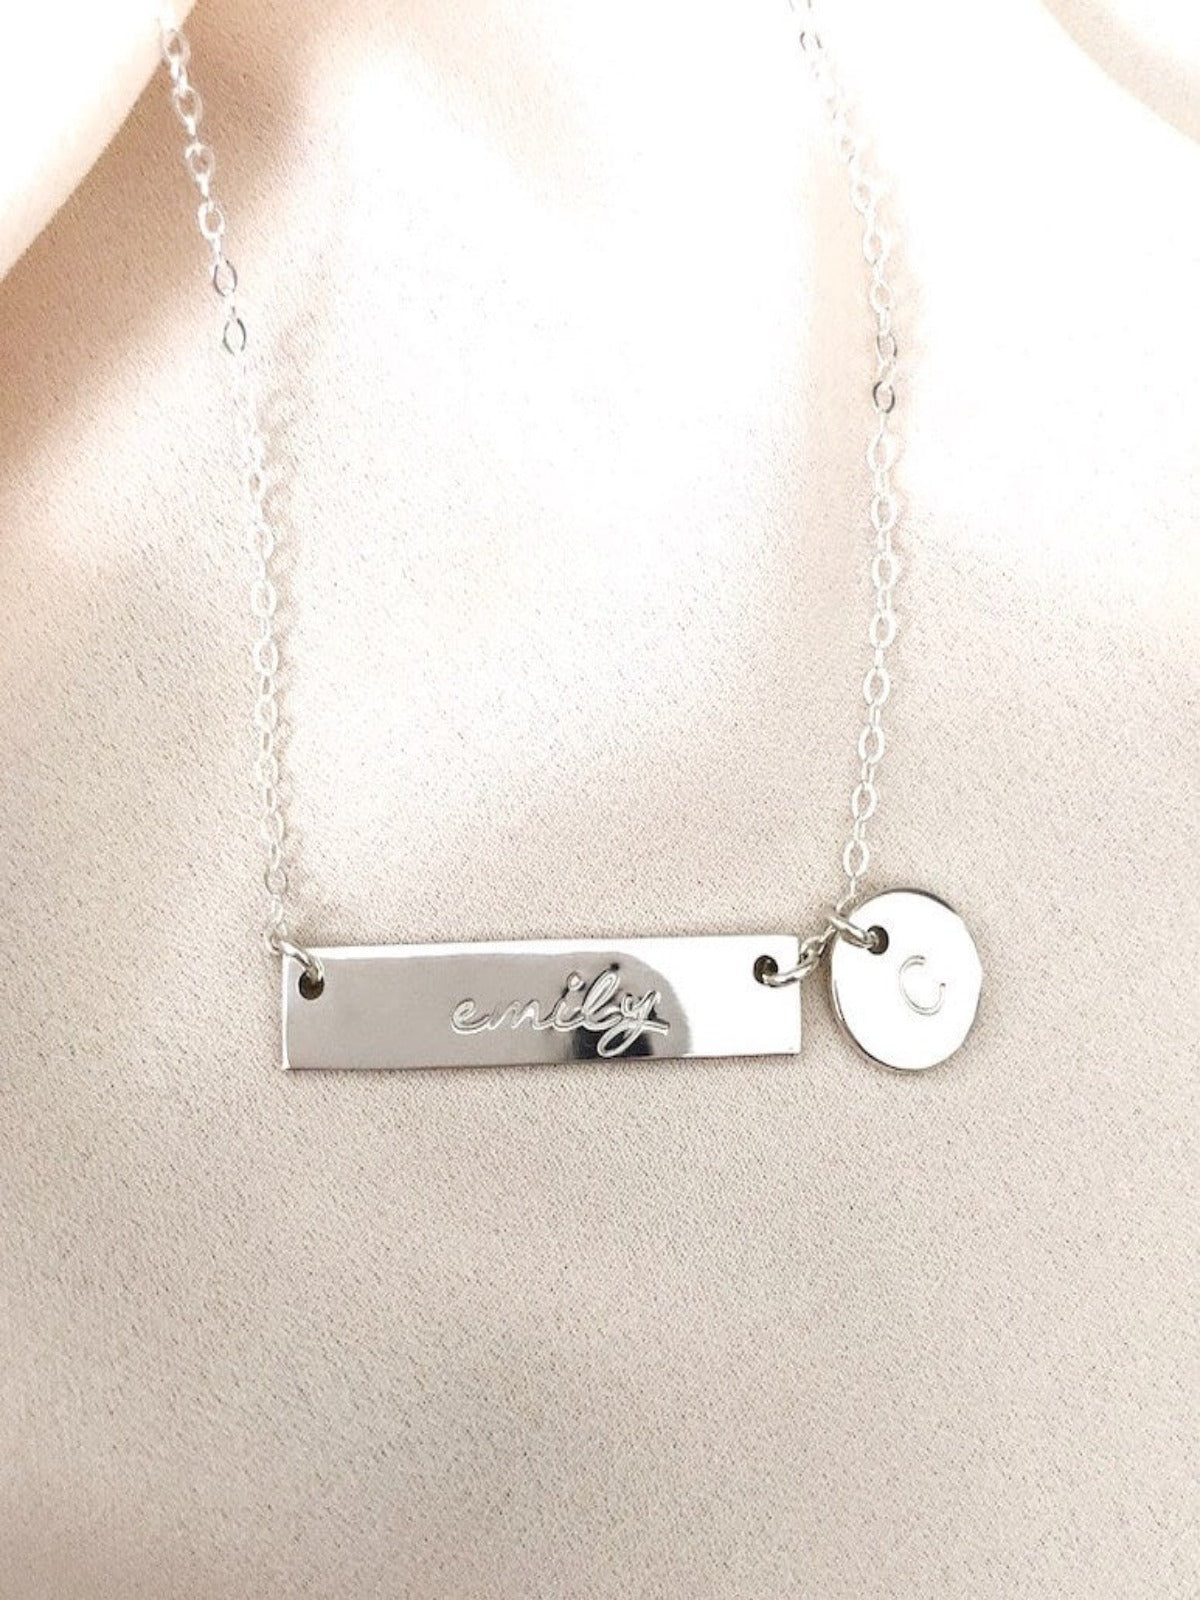 Calliope - Bar Necklace with Charm Pendant